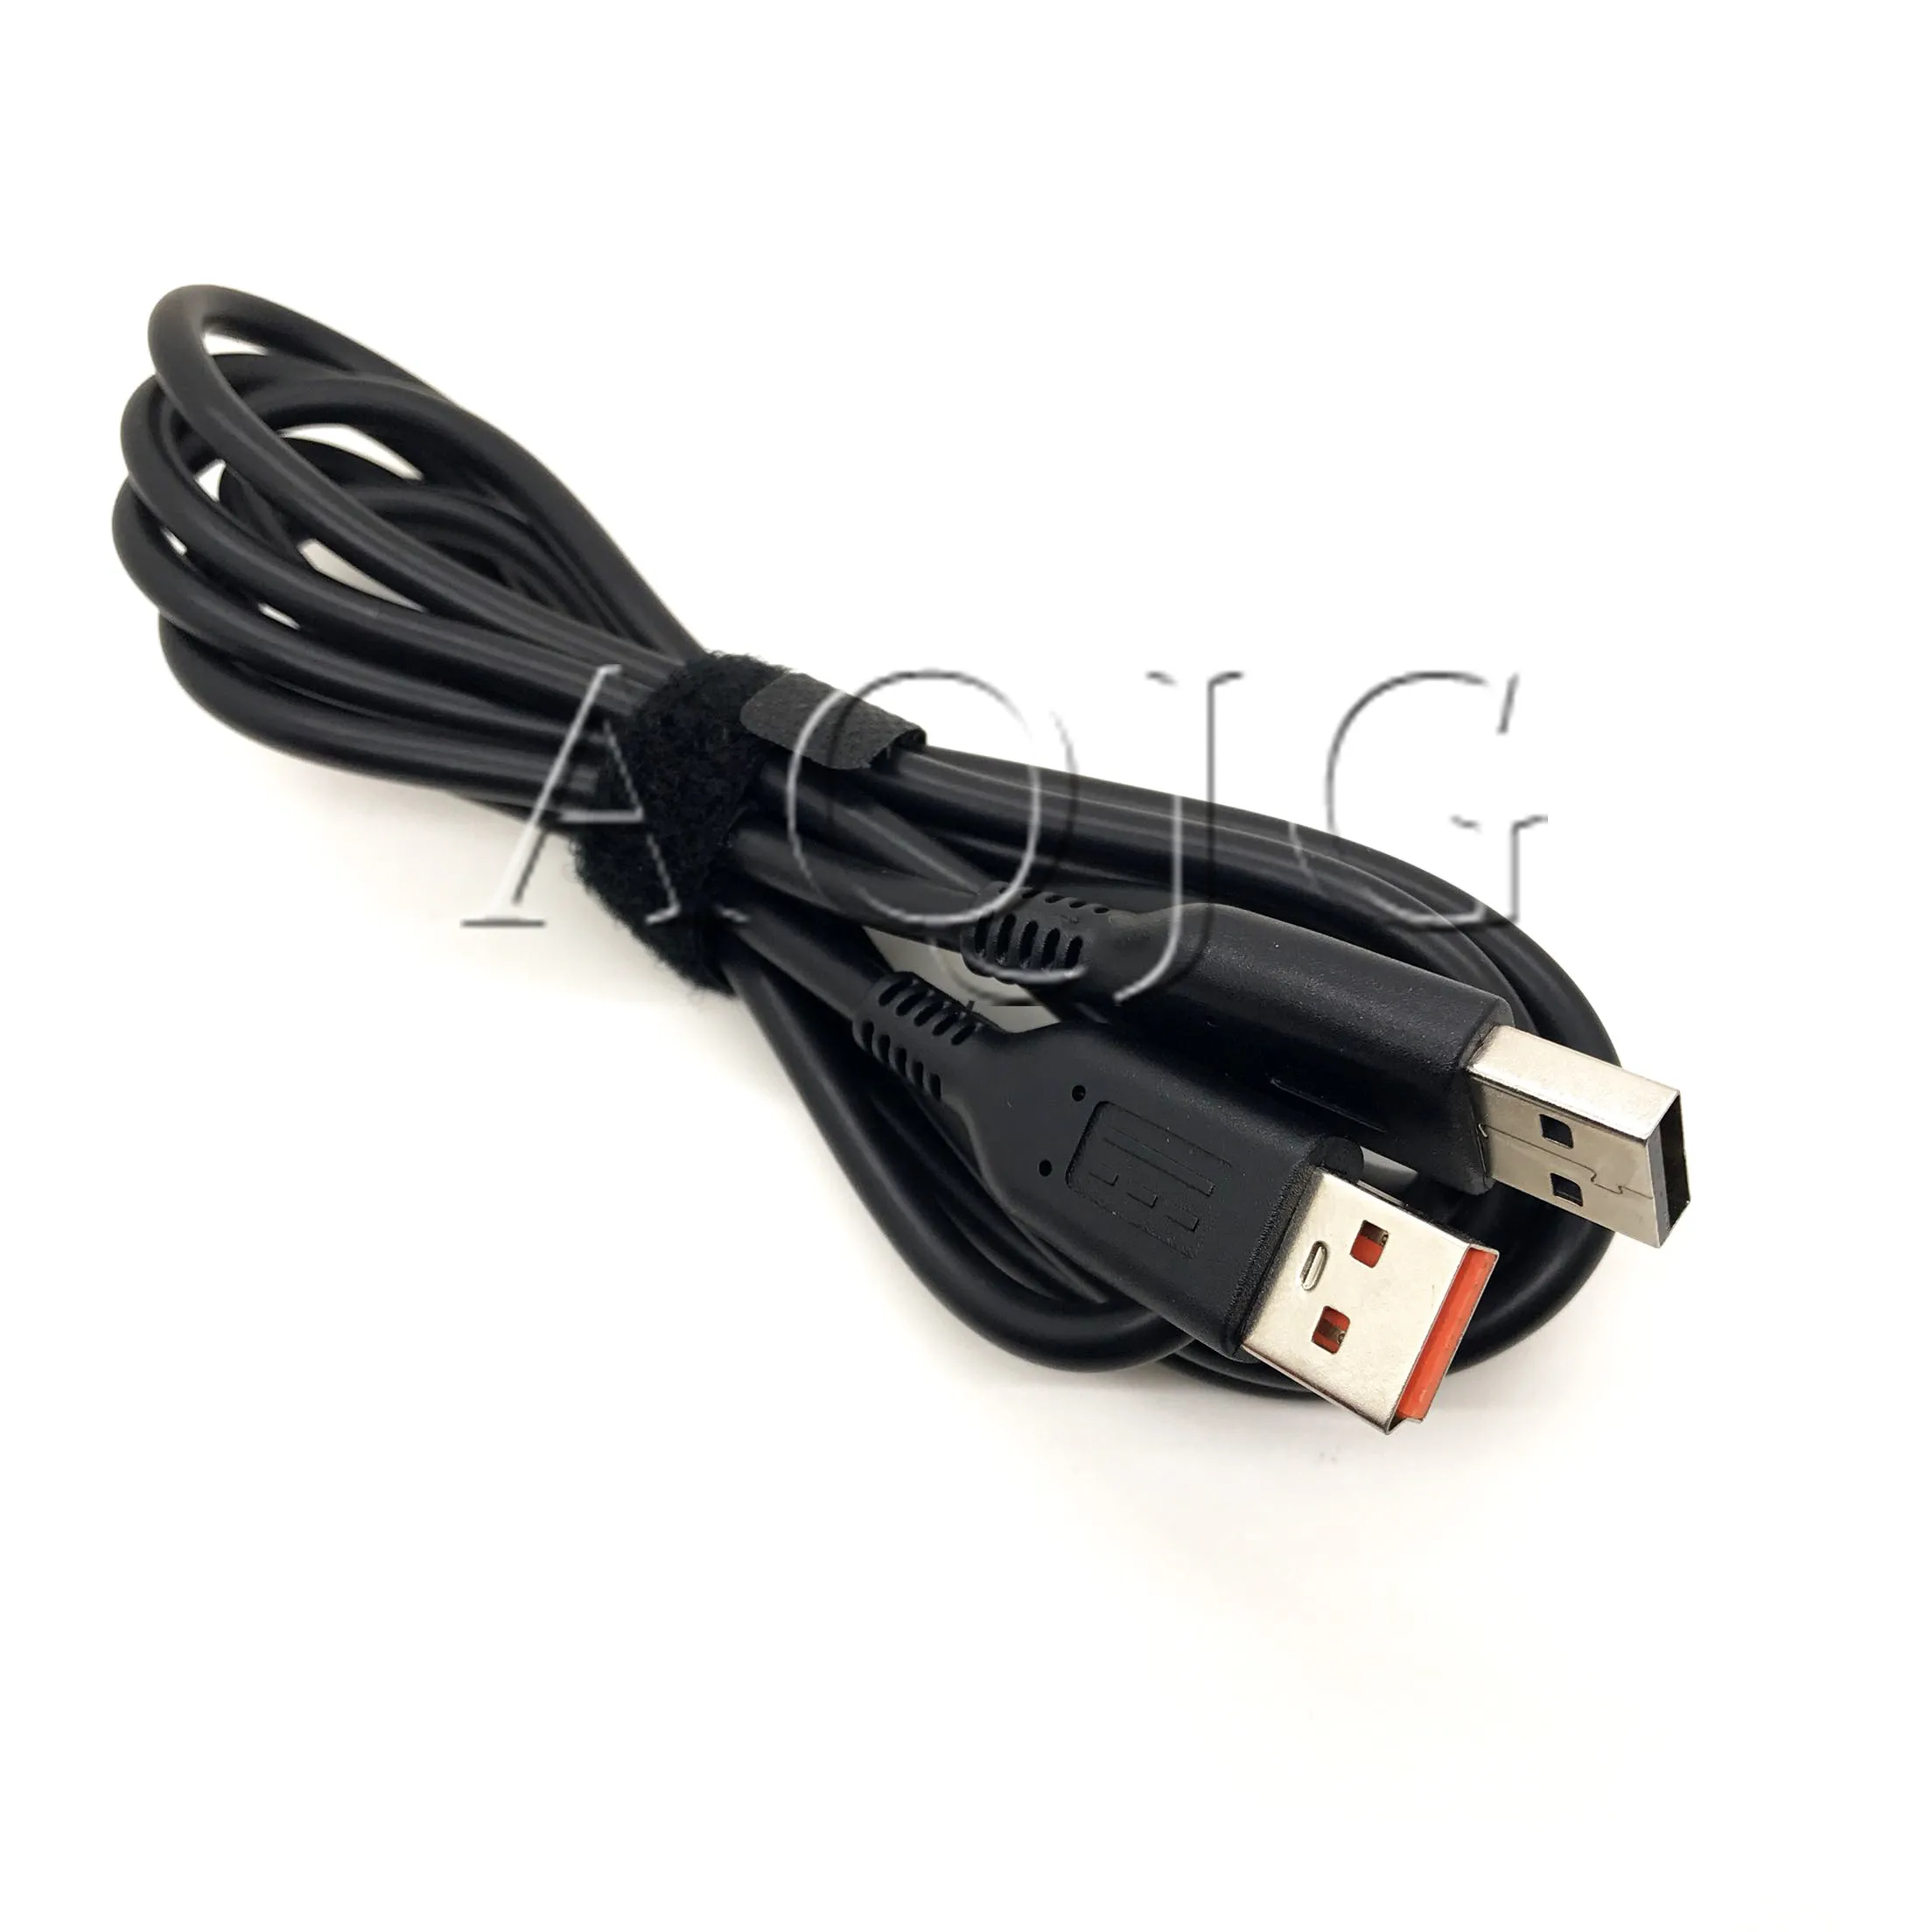 

AC Power Supply Charging Charger Cord USB Cable for Lenovo Yoga3 Pro Yoga 3 Pro Yoga4 Pro Yoga 700 900 Miix 700 Laptop Tablet